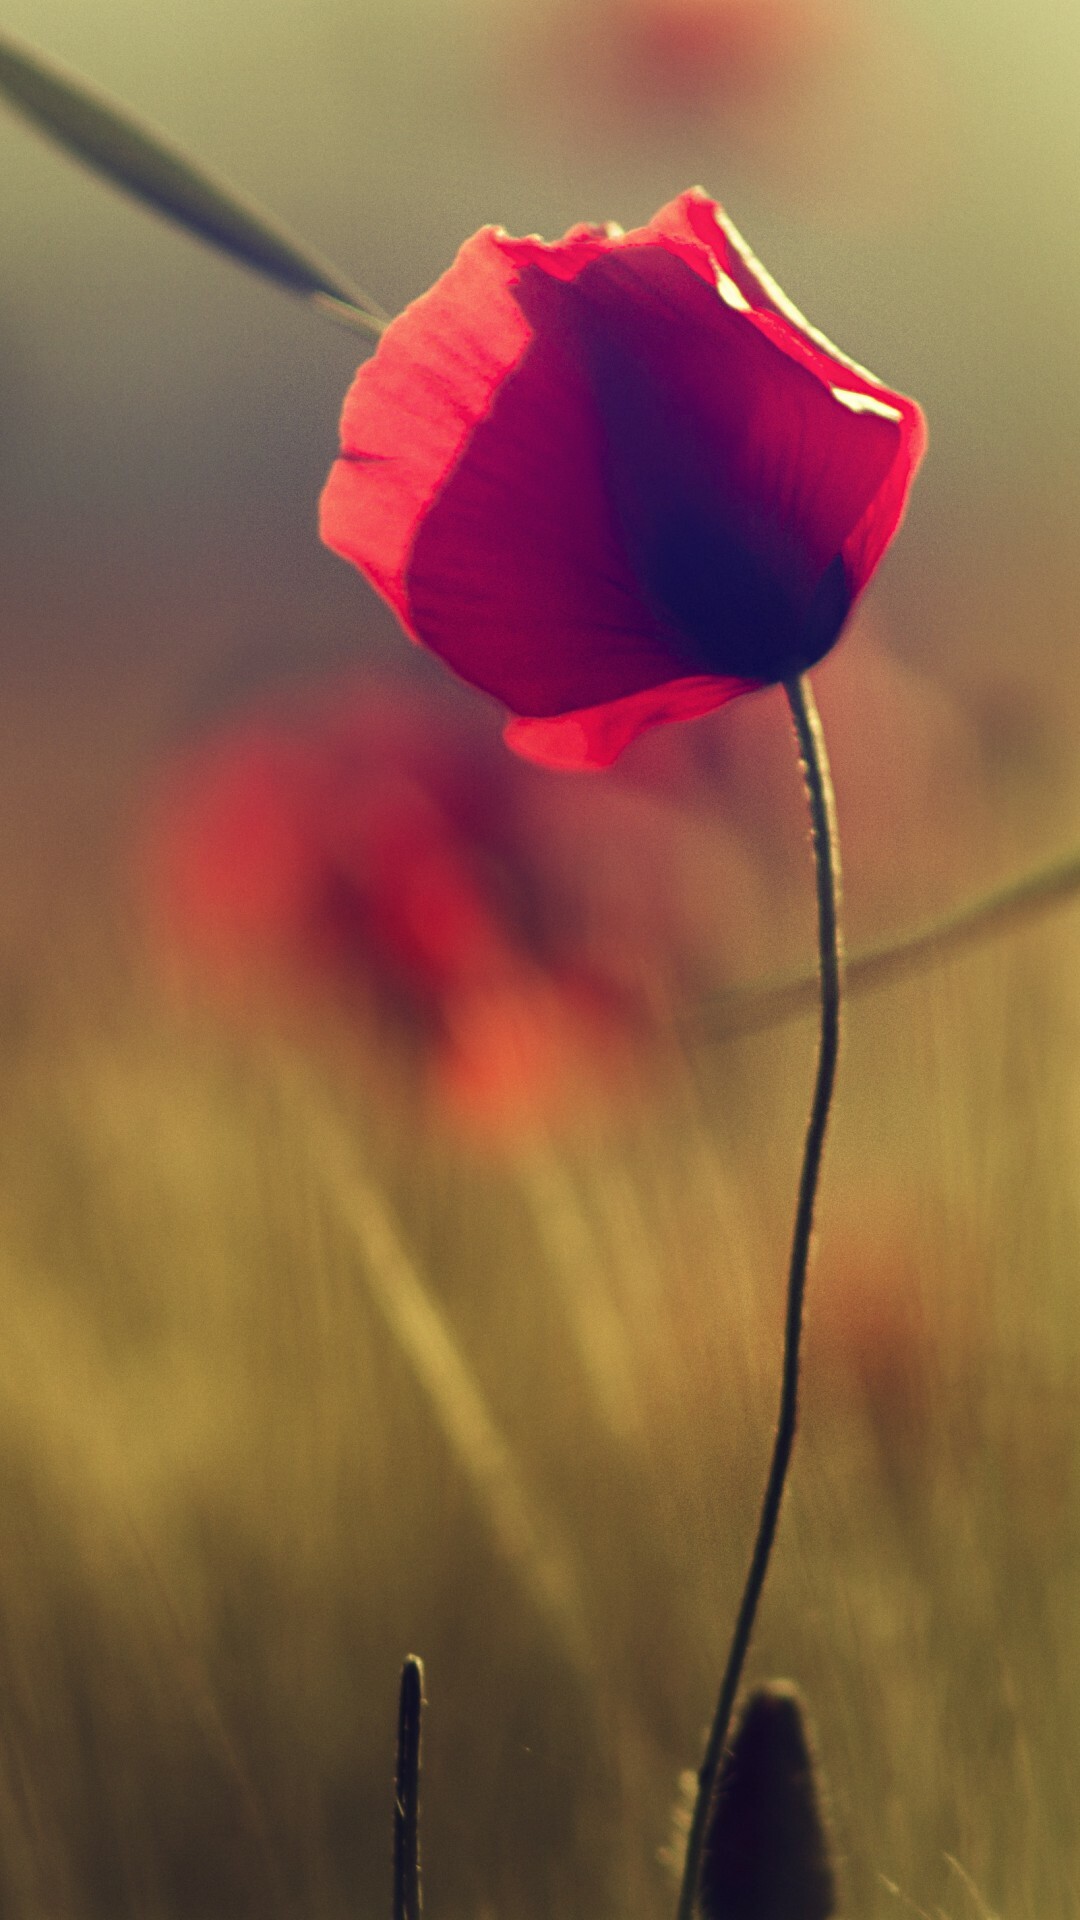 Poppy Flower: The species contains alkaloid compounds that are poisonous to both humans and pets, Flowering plant. 1080x1920 Full HD Wallpaper.